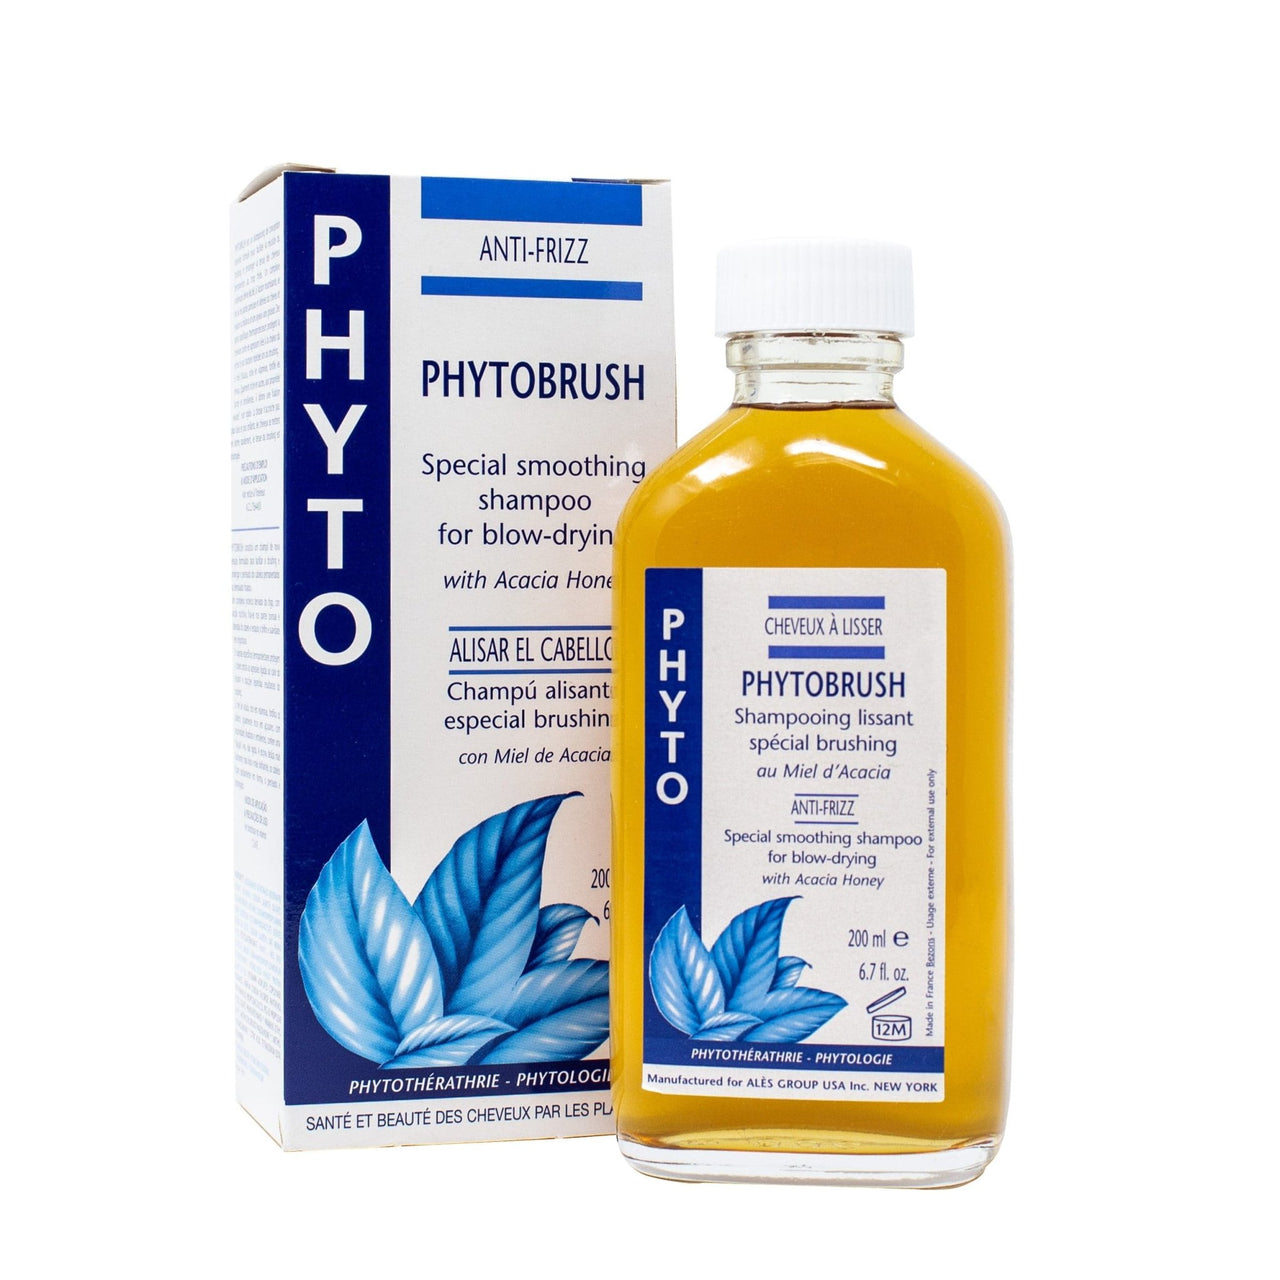 PHYTO_Phytobrush special smoothing shampoo for blow drying 6.7oz_Cosmetic World